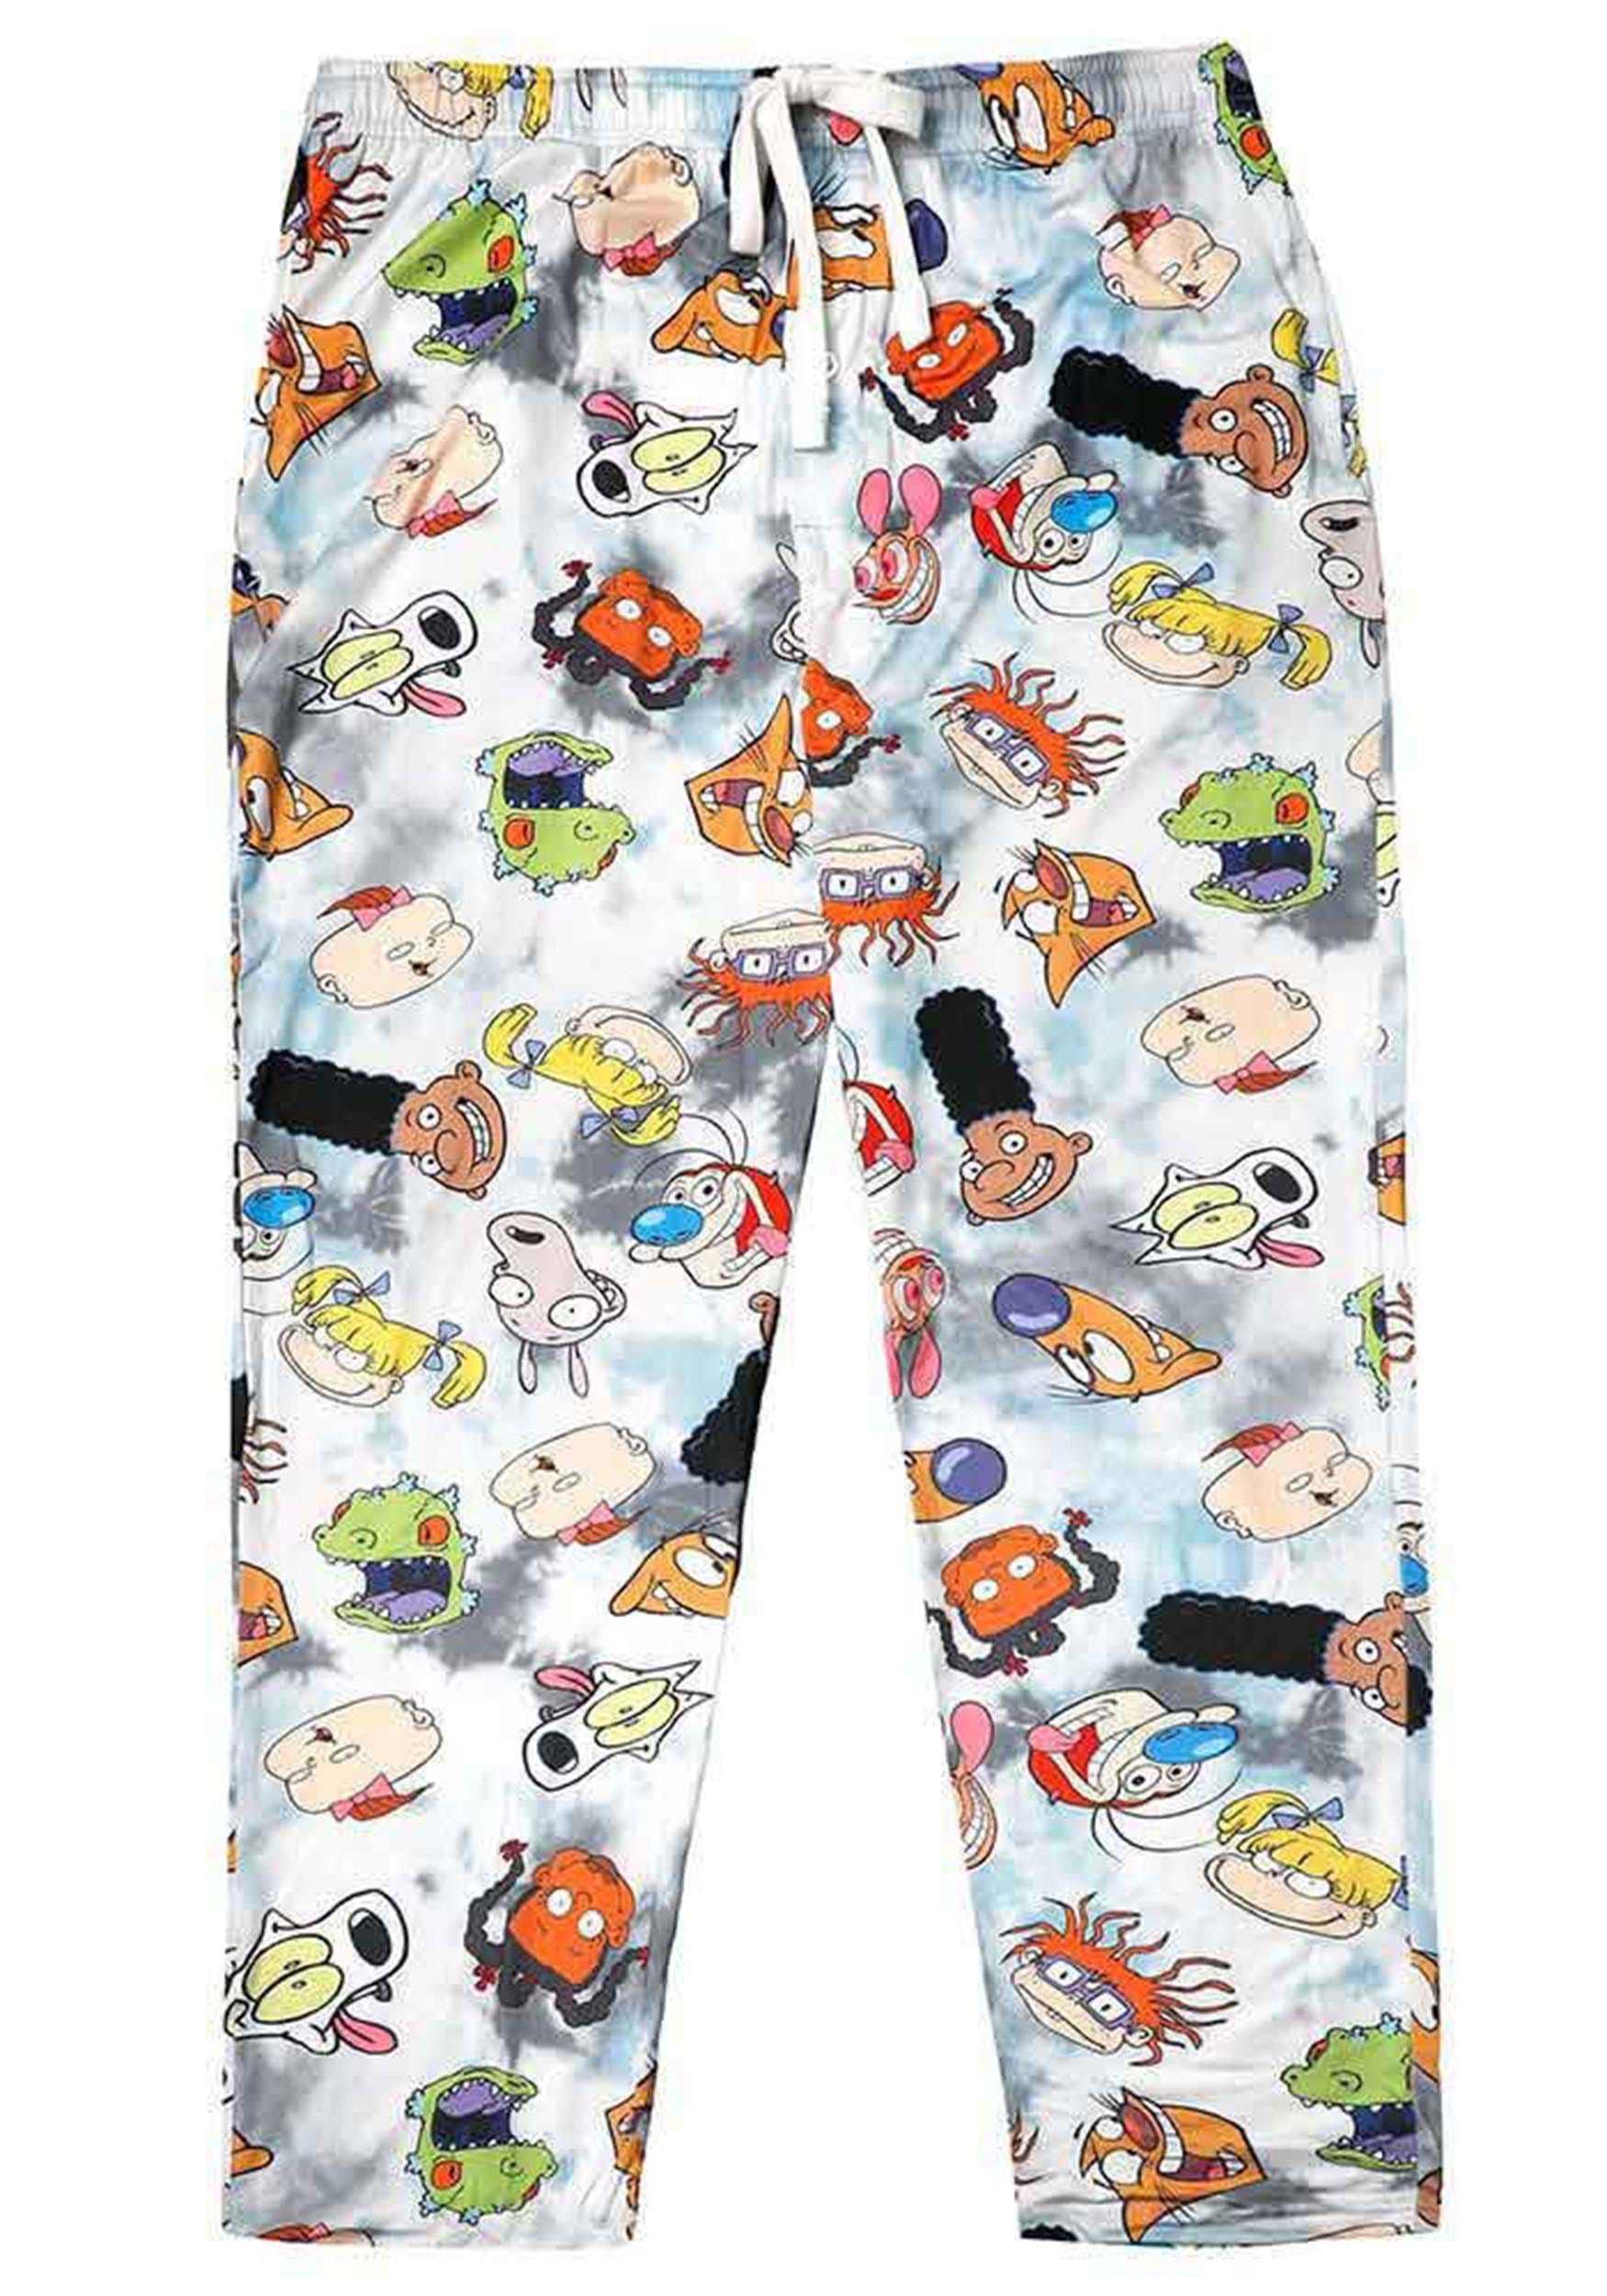 https://images.fun.com/products/89745/1-1/adult-90s-nickelodeon-all-over-print-sleep-pants.jpg